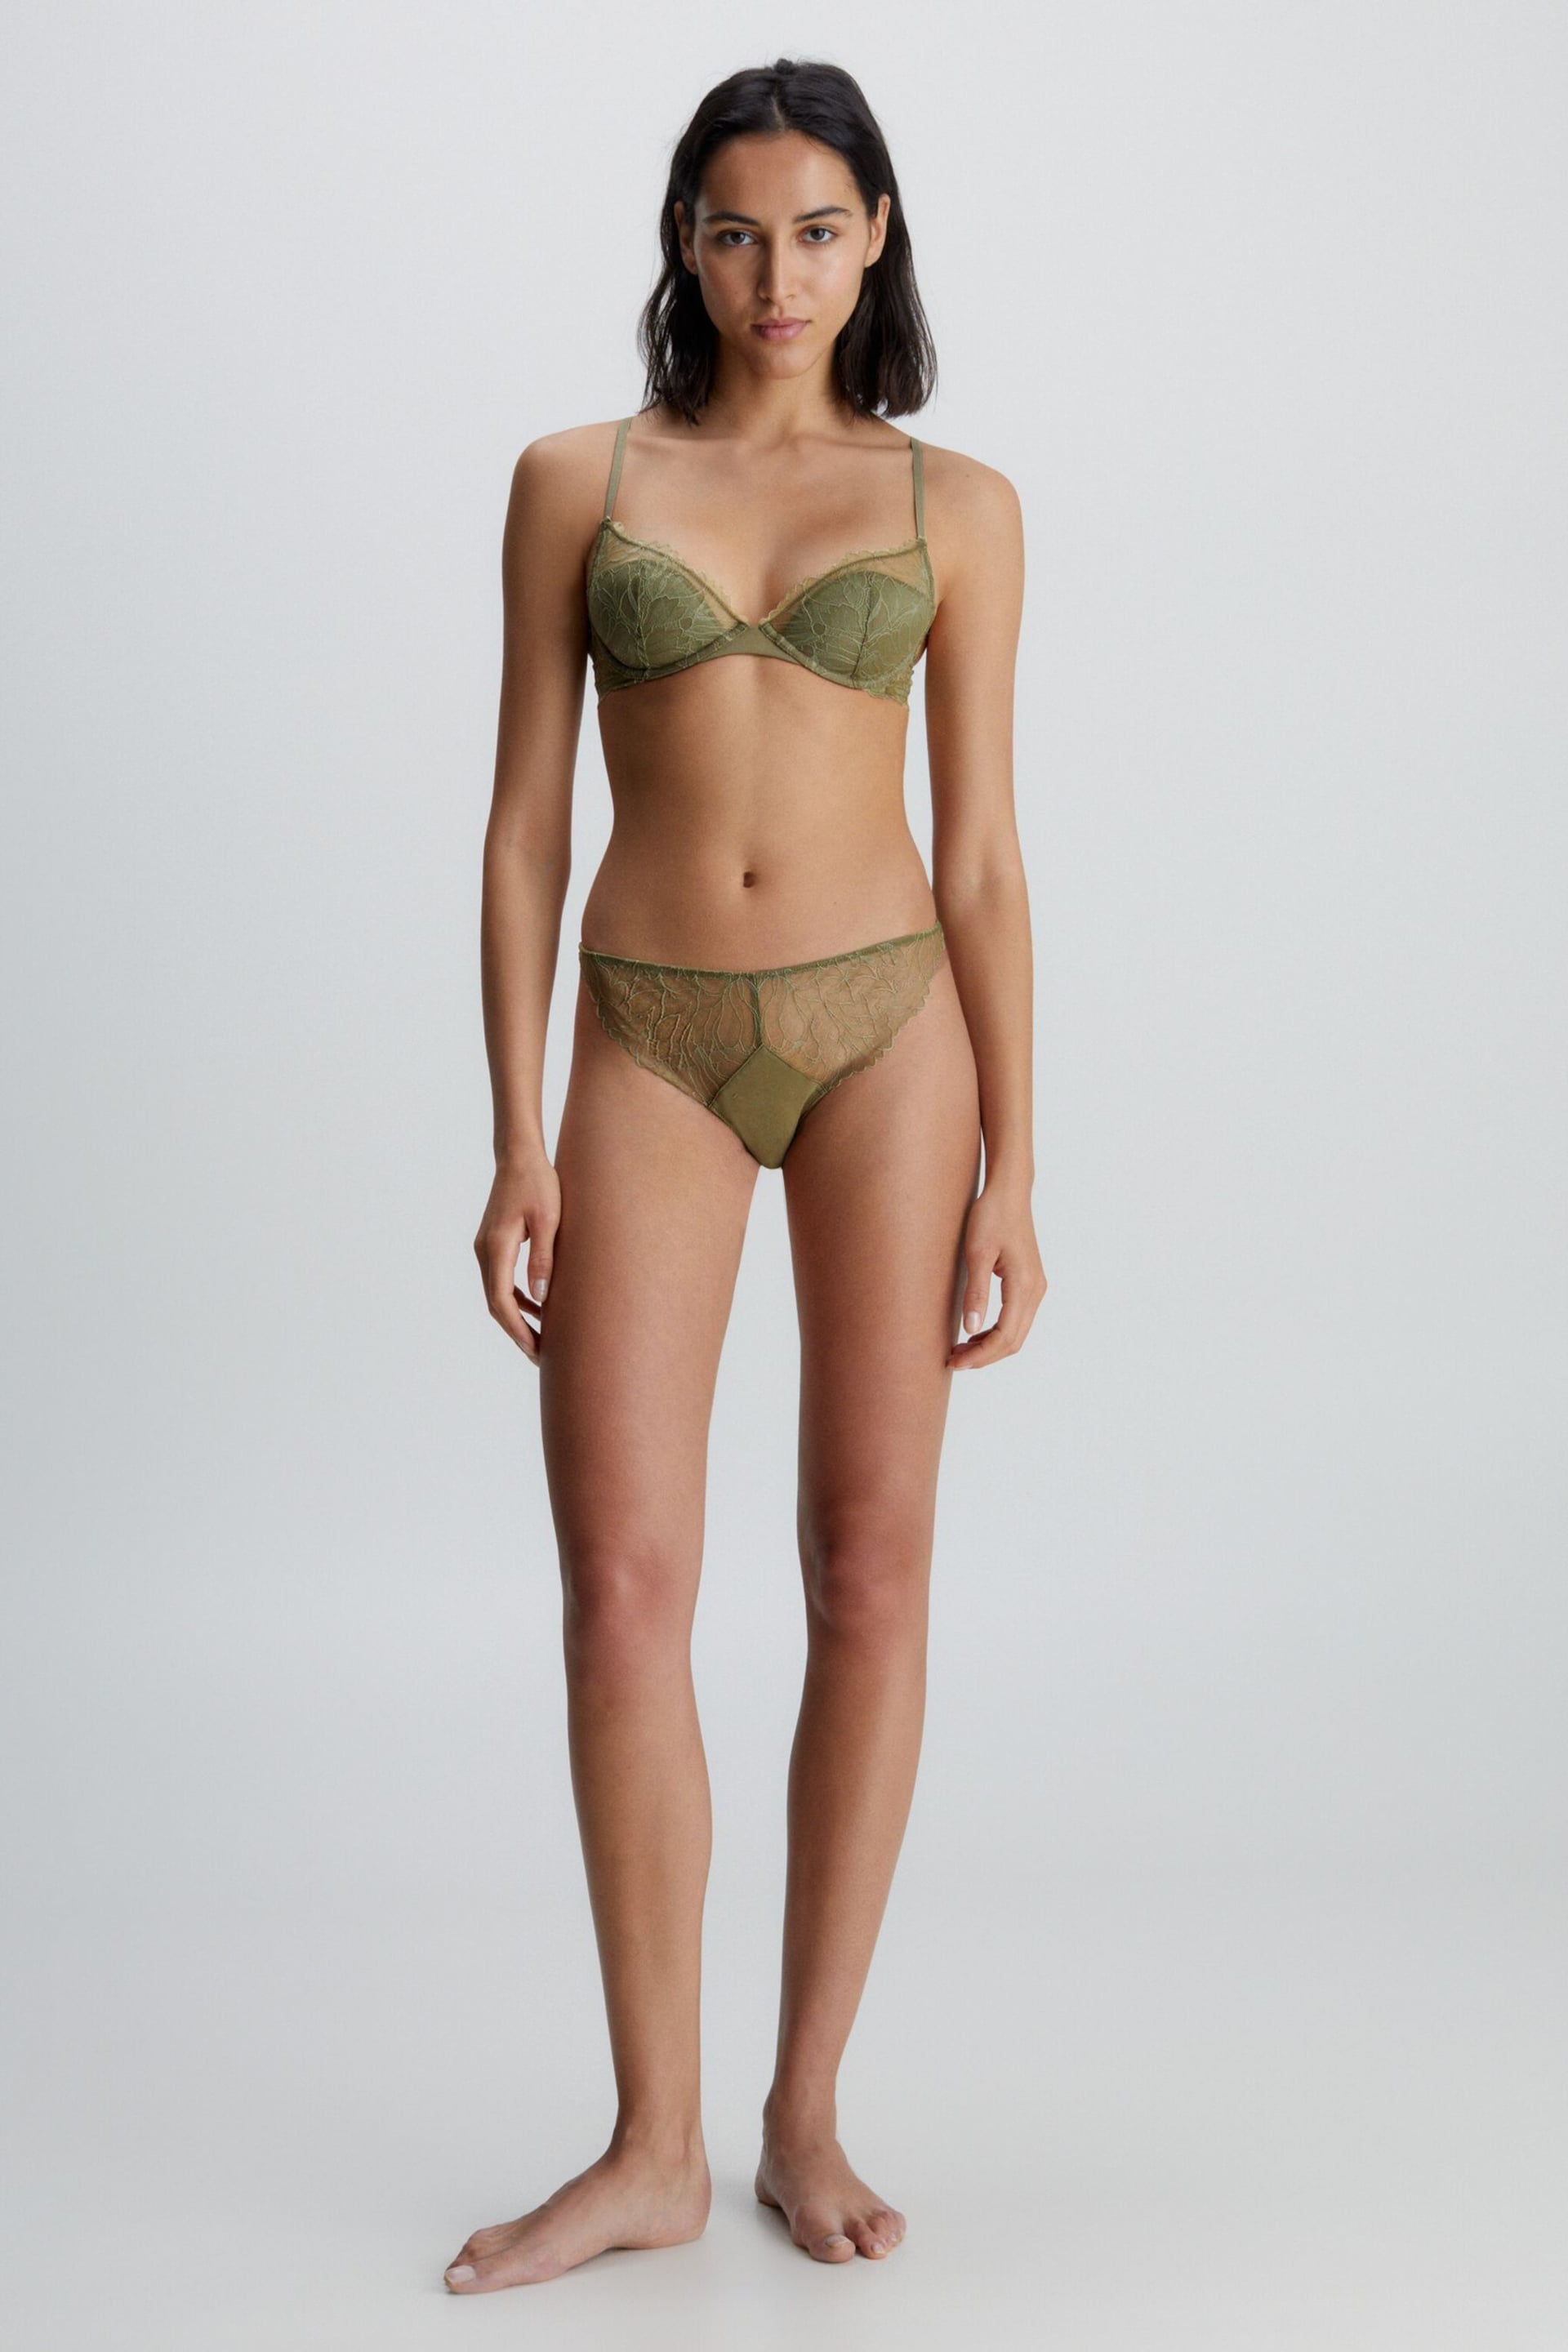 Calvin Klein Green Floral Lace Plunge Bra - Image 4 of 5